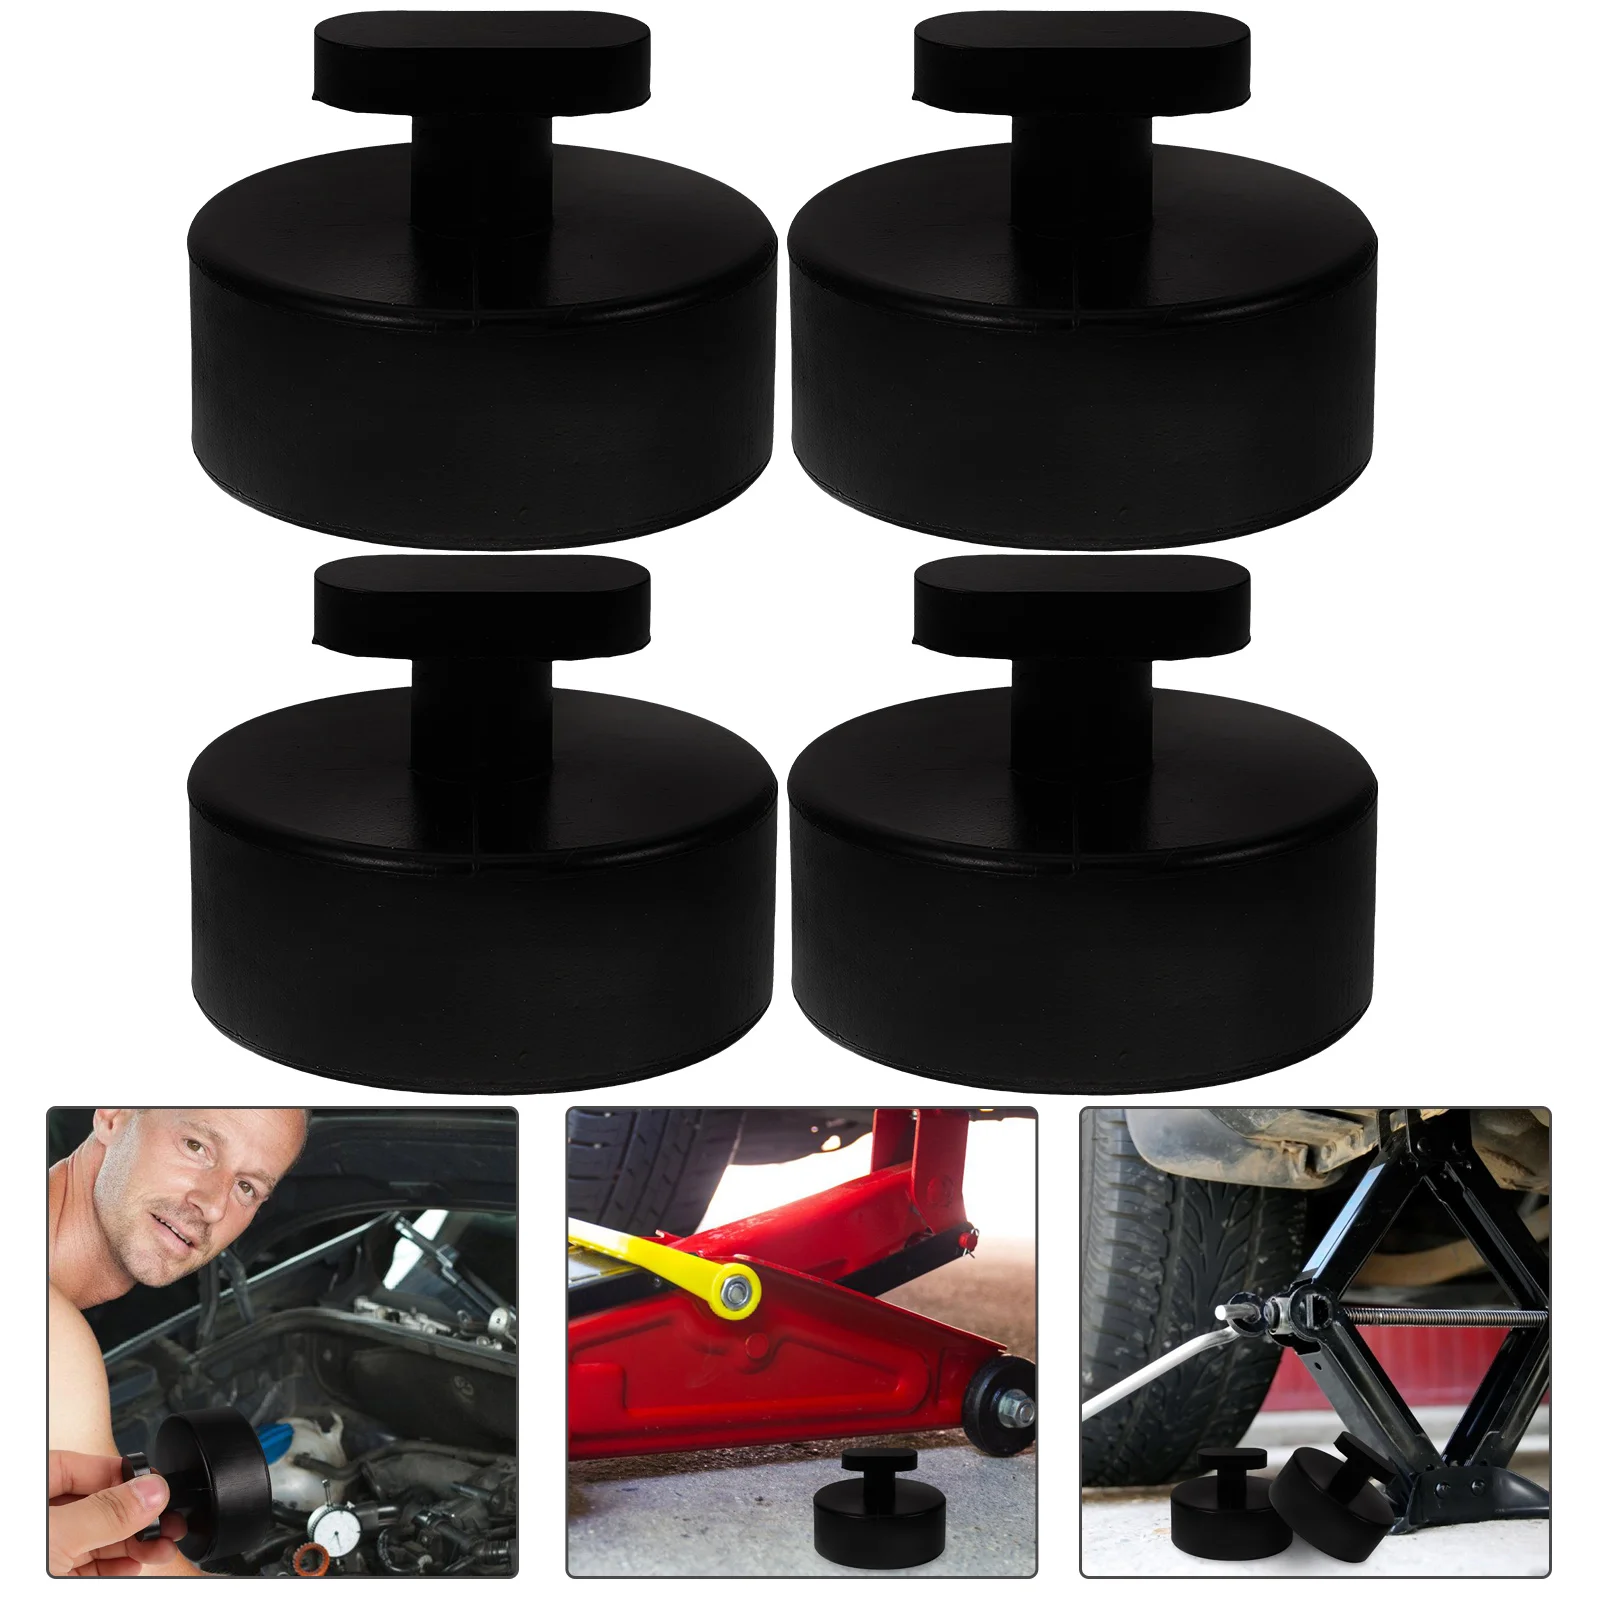 4 Pcs Car Chassis Jack Rubber Pad Support 4pcs Floor Pads Bracket for Stand Rv Pinch Welds Black Mat black lift support jack pad under car jacking point pad for b w 328i 2007 2013 51717164761 car